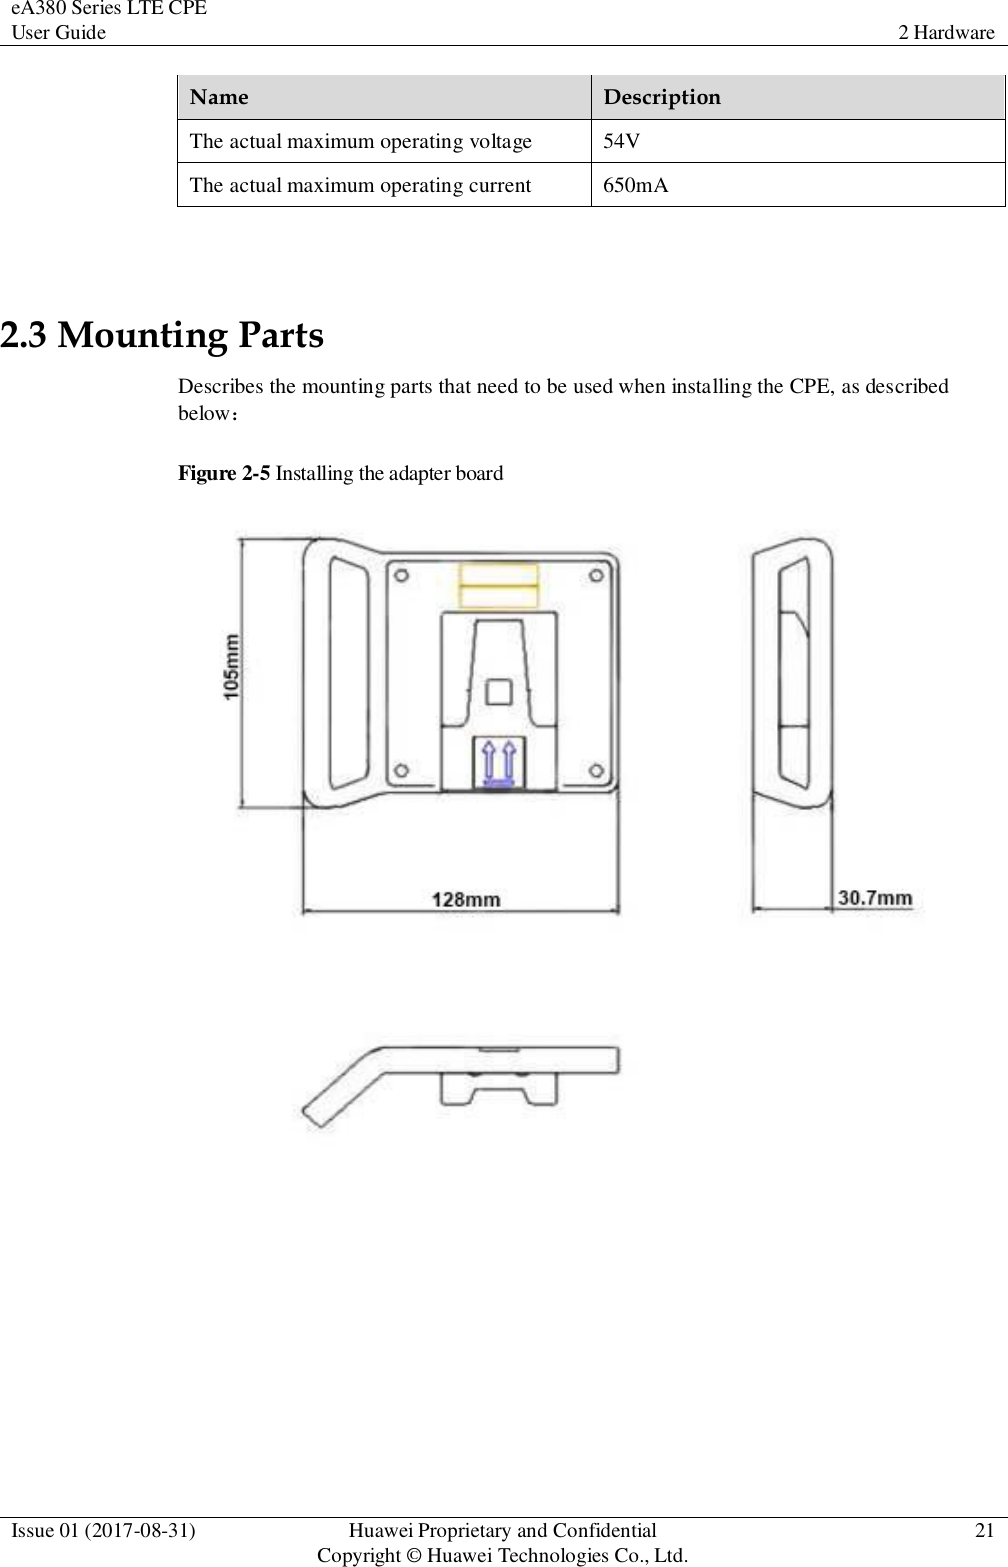 eA380 Series LTE CPE User Guide 2 Hardware  Issue 01 (2017-08-31) Huawei Proprietary and Confidential                                     Copyright © Huawei Technologies Co., Ltd. 21  Name Description The actual maximum operating voltage 54V The actual maximum operating current 650mA  2.3 Mounting Parts Describes the mounting parts that need to be used when installing the CPE, as described below： Figure 2-5 Installing the adapter board  